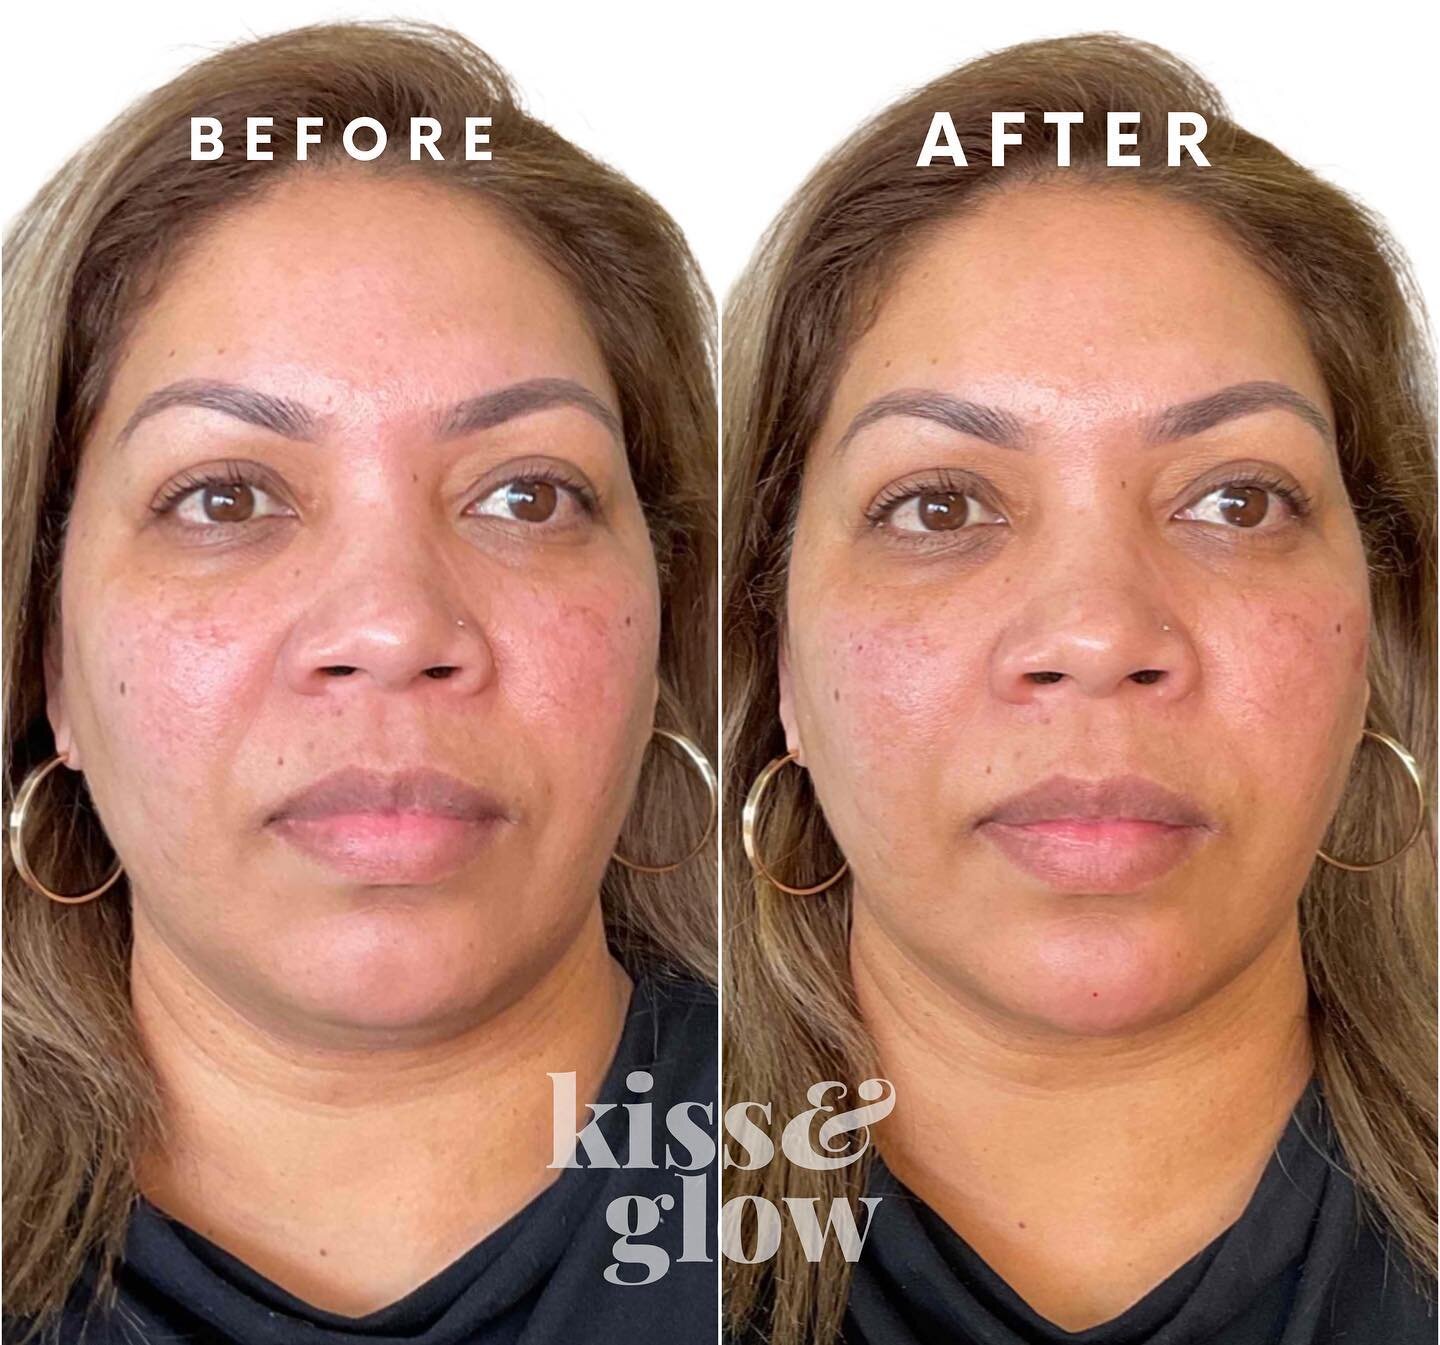 This lovely client has had both a chin and cheek augmentation 

Chin filler can contribute to a balanced and harmonious facial structure, helping you achieve a heart-shaped face, while creating the illusion of slimming down the lower face

Likewise c